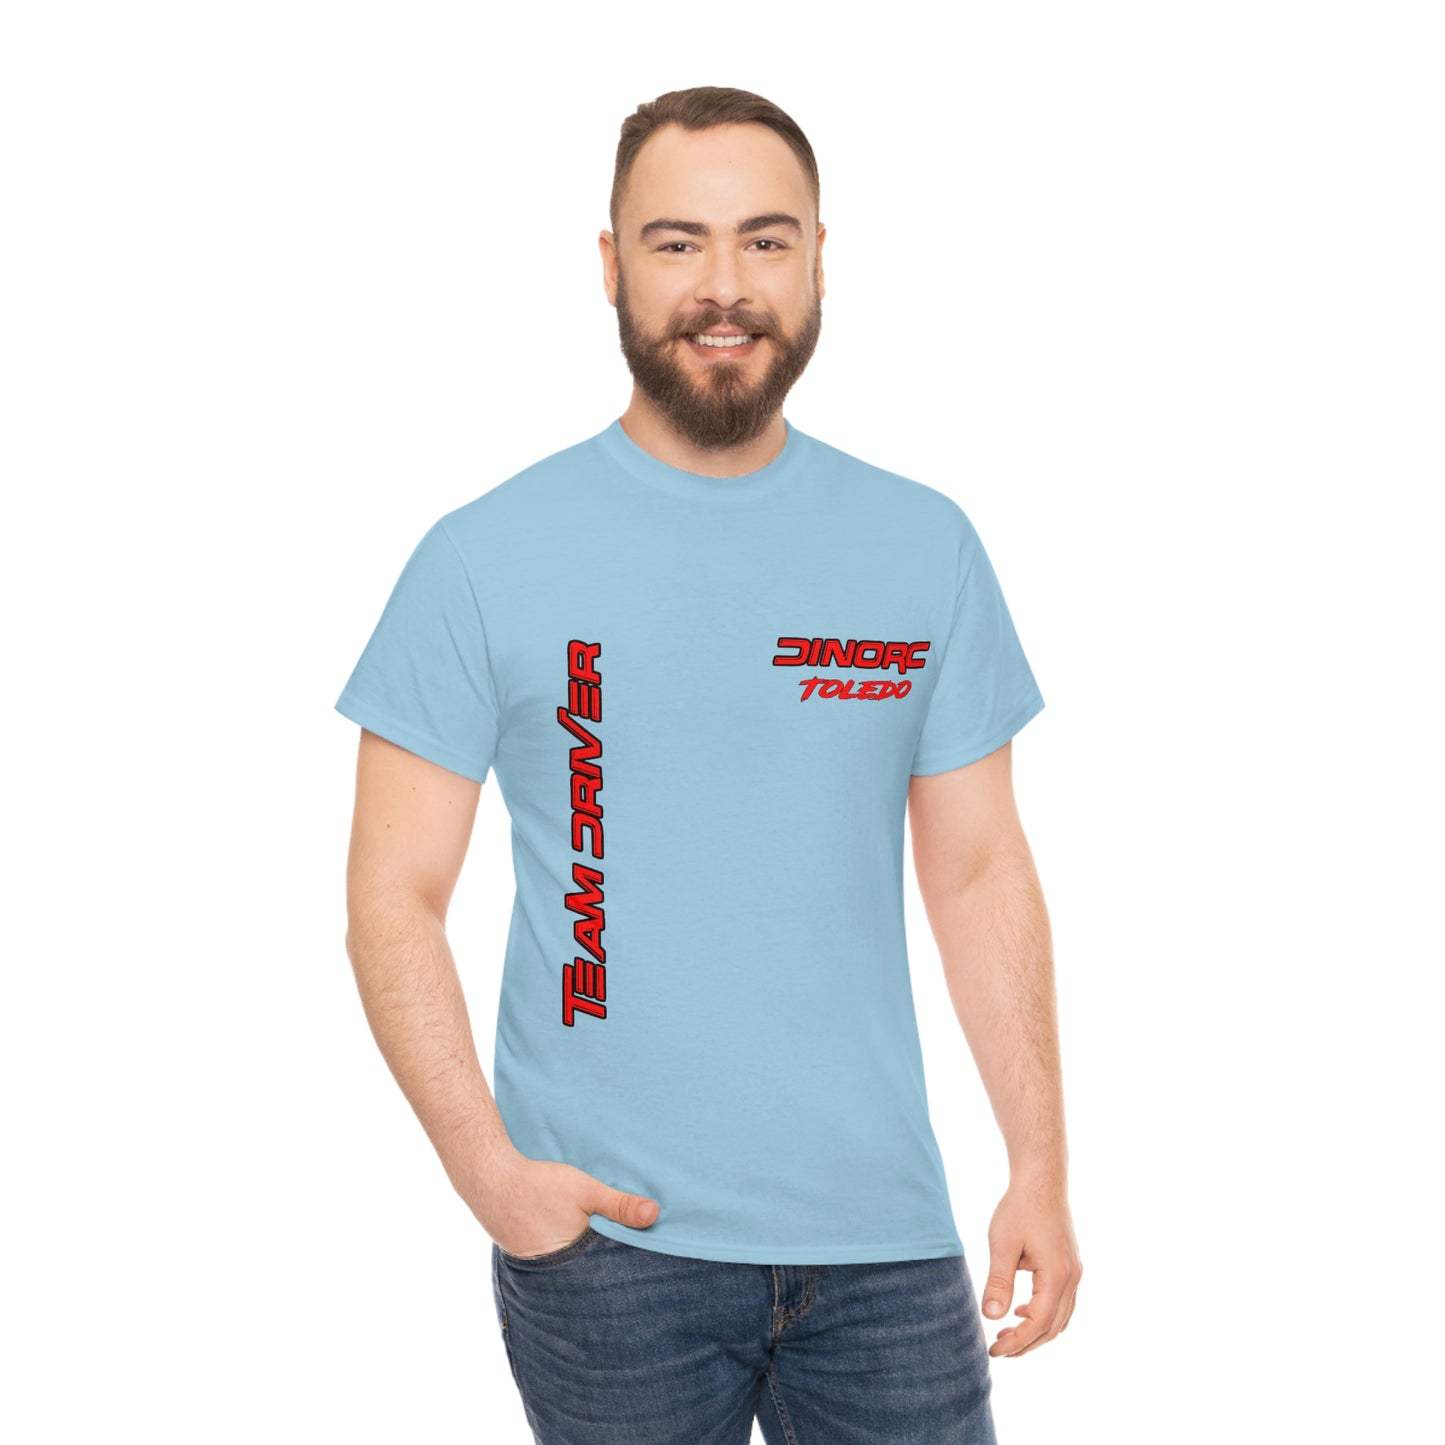 Team Driver Toledo Front and Back DinoRc Logo T-Shirt S-5x 5 colors